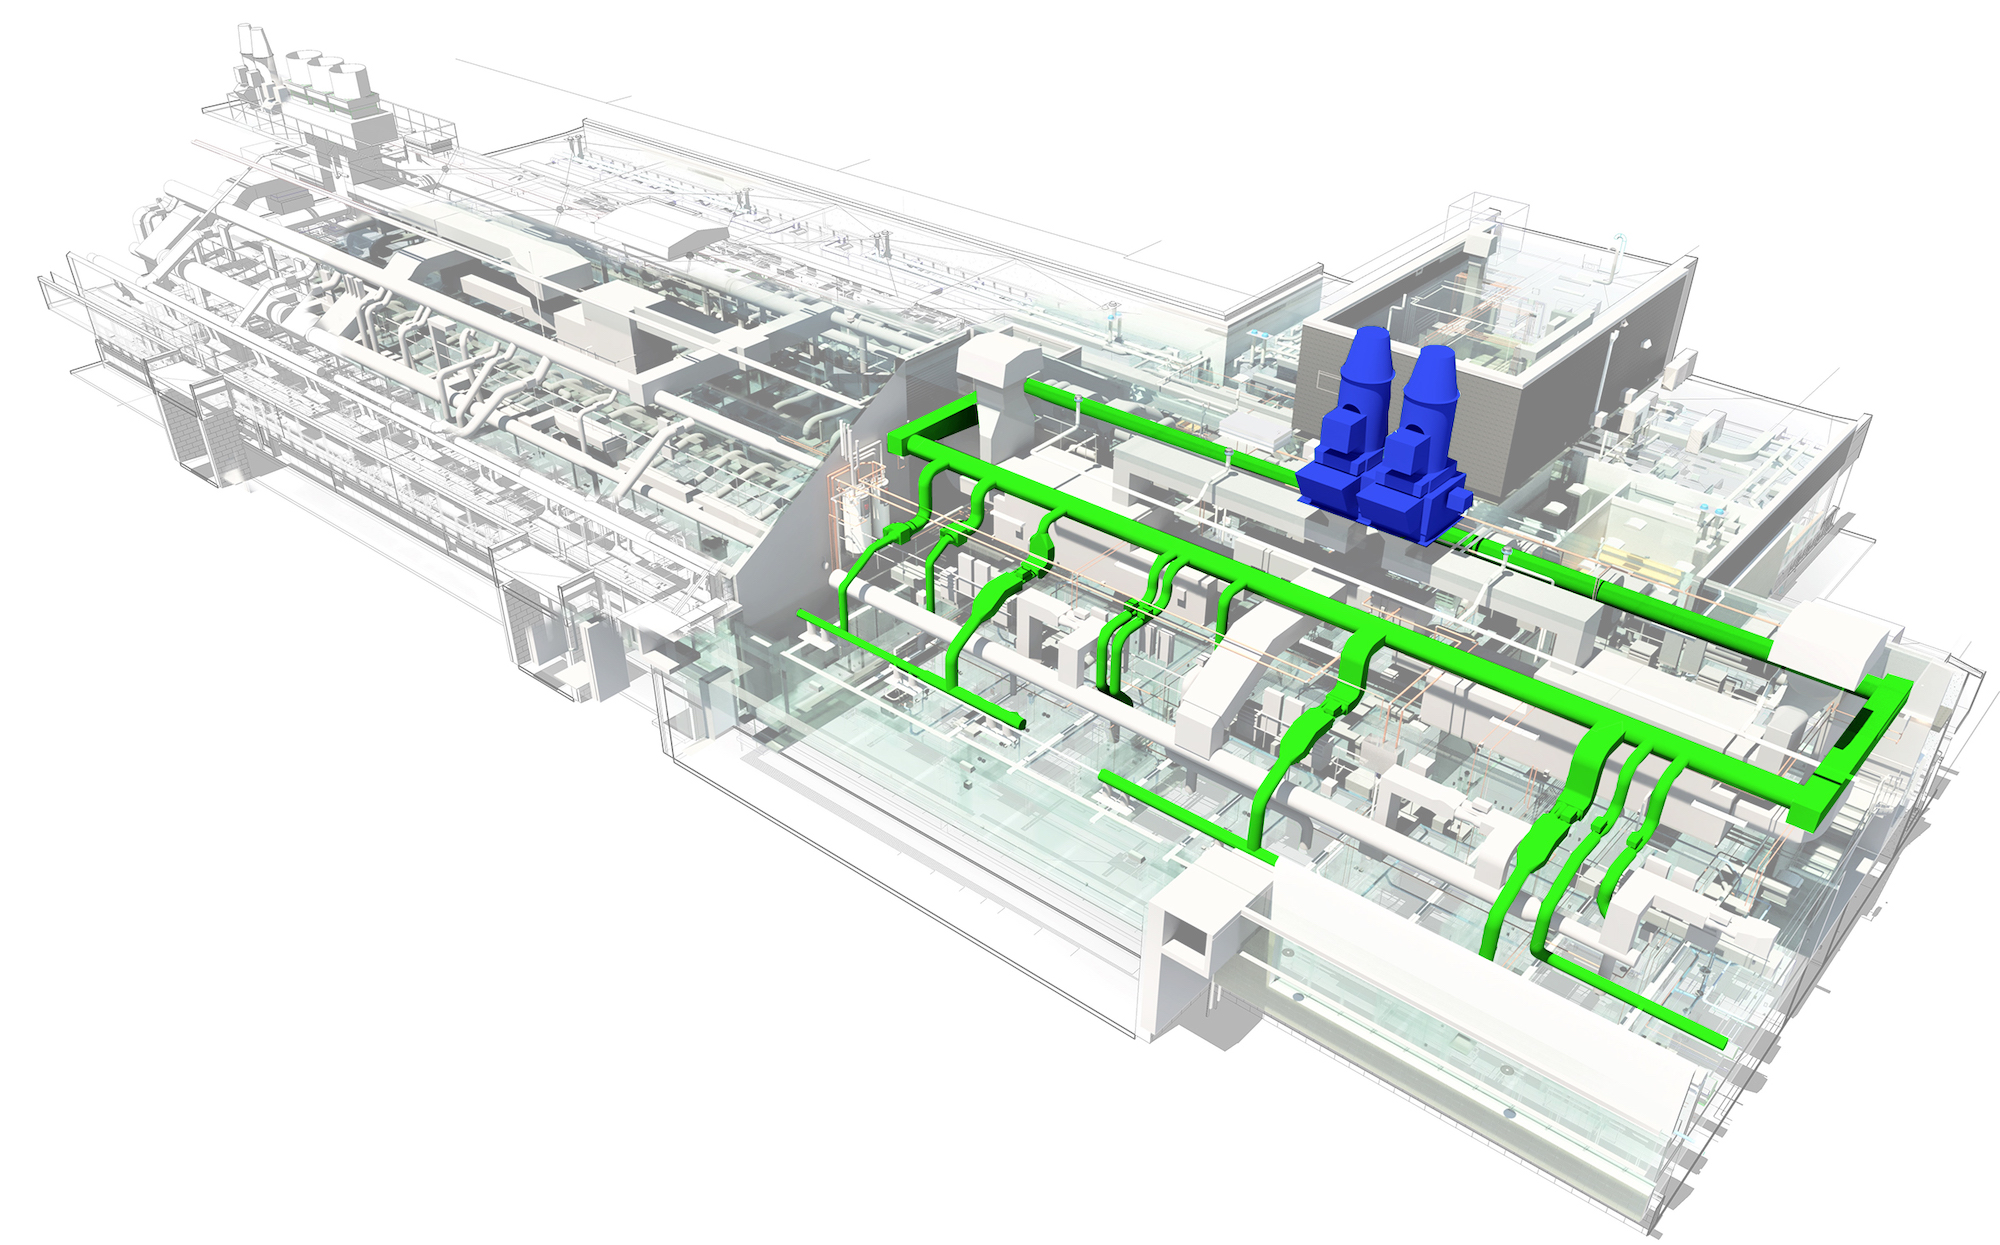  In blue, single asset – exhaust fan. In green, group of assets – lab exhaust system. Courtesy: CDM Smith.